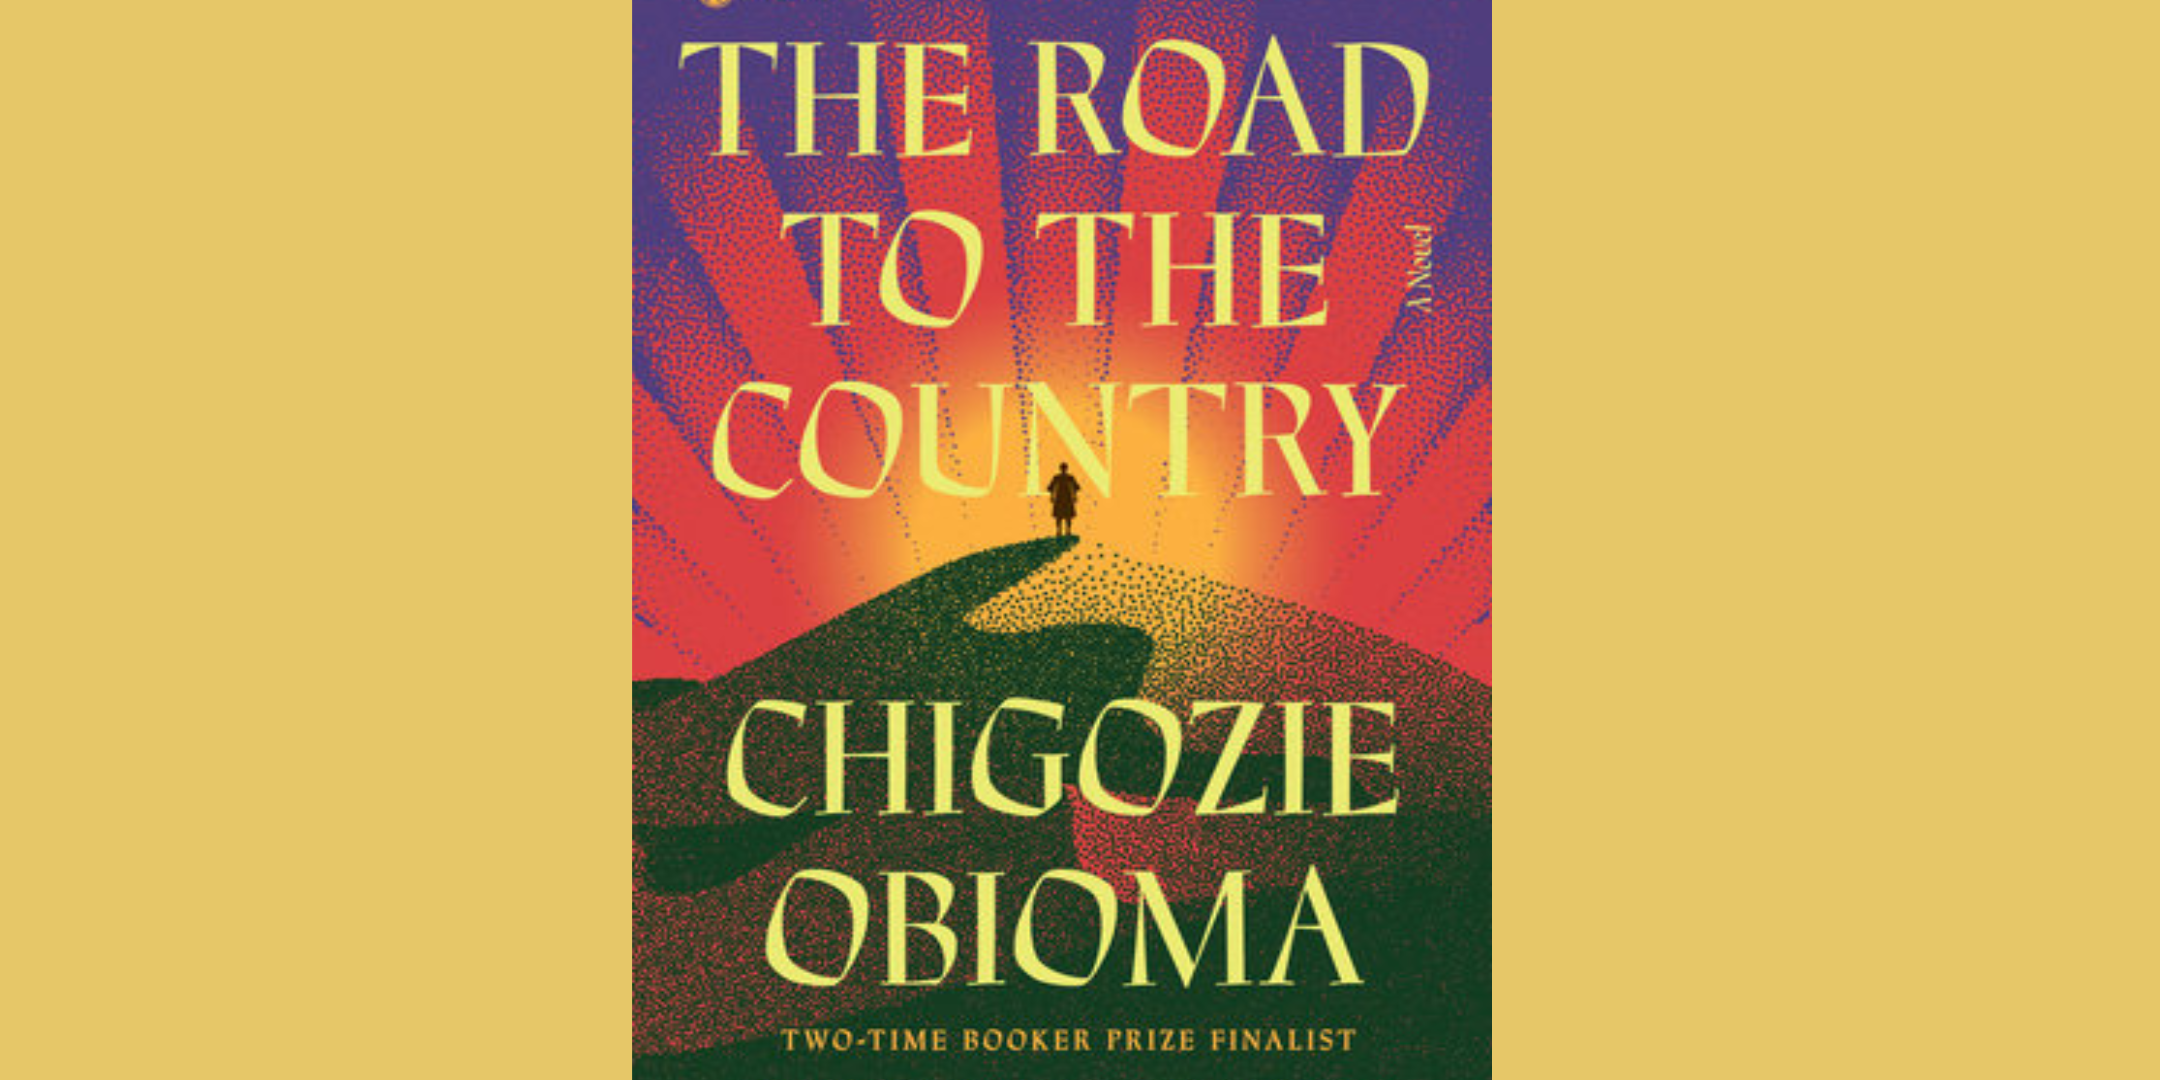 Cover of "The Road to the Country" by Chigozie Obioma. Two-time Booker Prize Finalist. The cover of "The Road to the Country" shows a man in silhouette, standing on top of a green hill, staring at the rays of a glowing red and purple sunset.